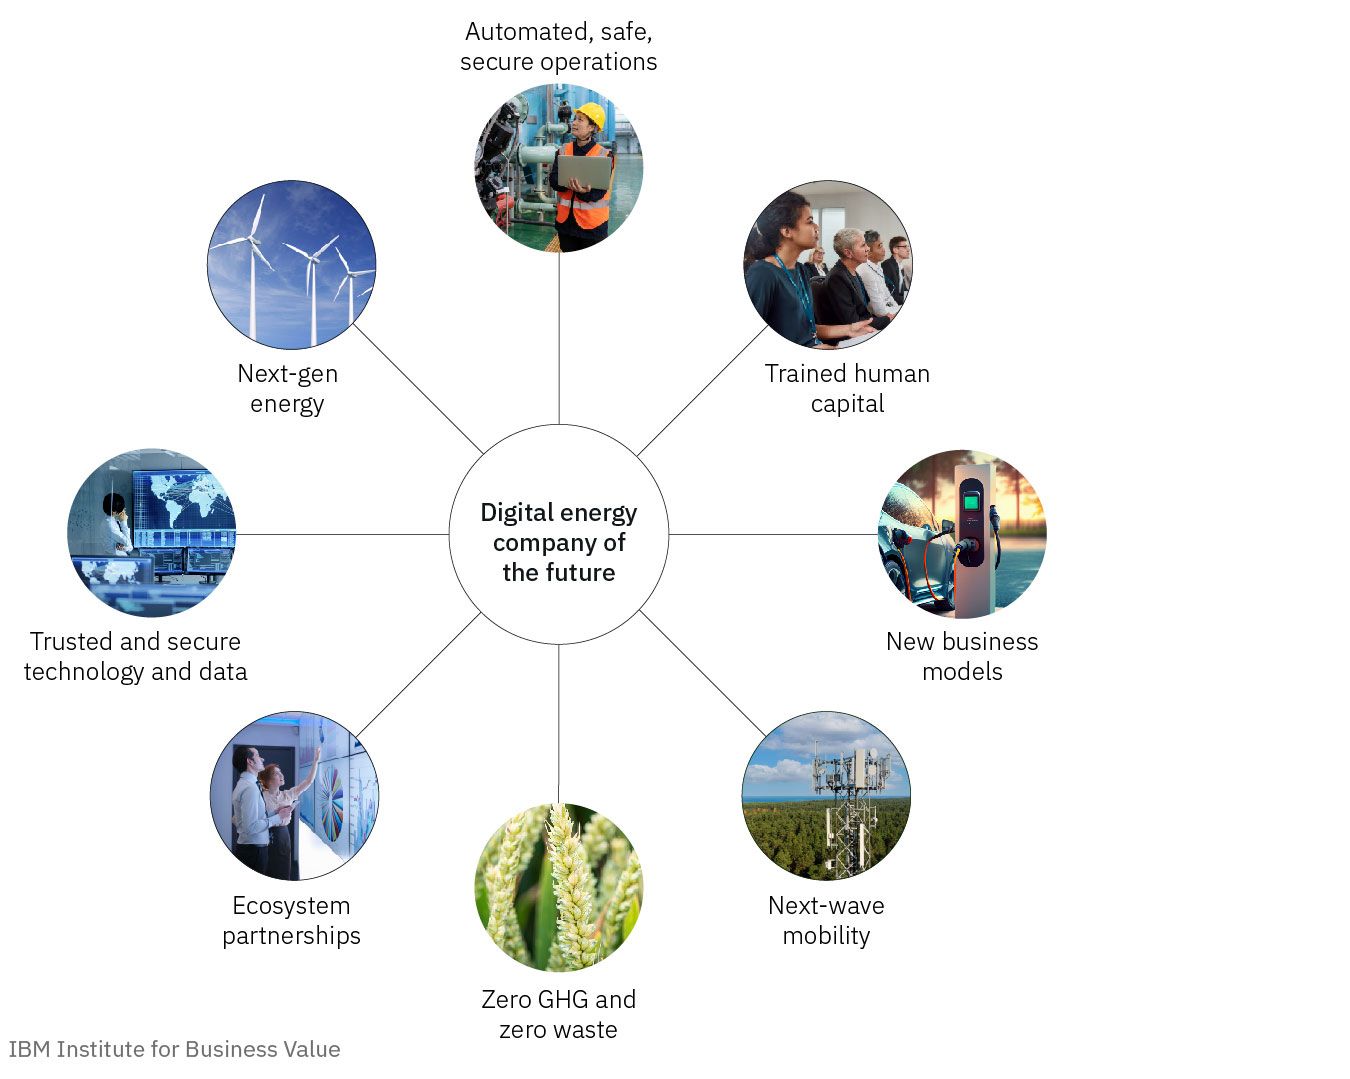 Digital energy company of the future: Orchestrating strategies across eight domains